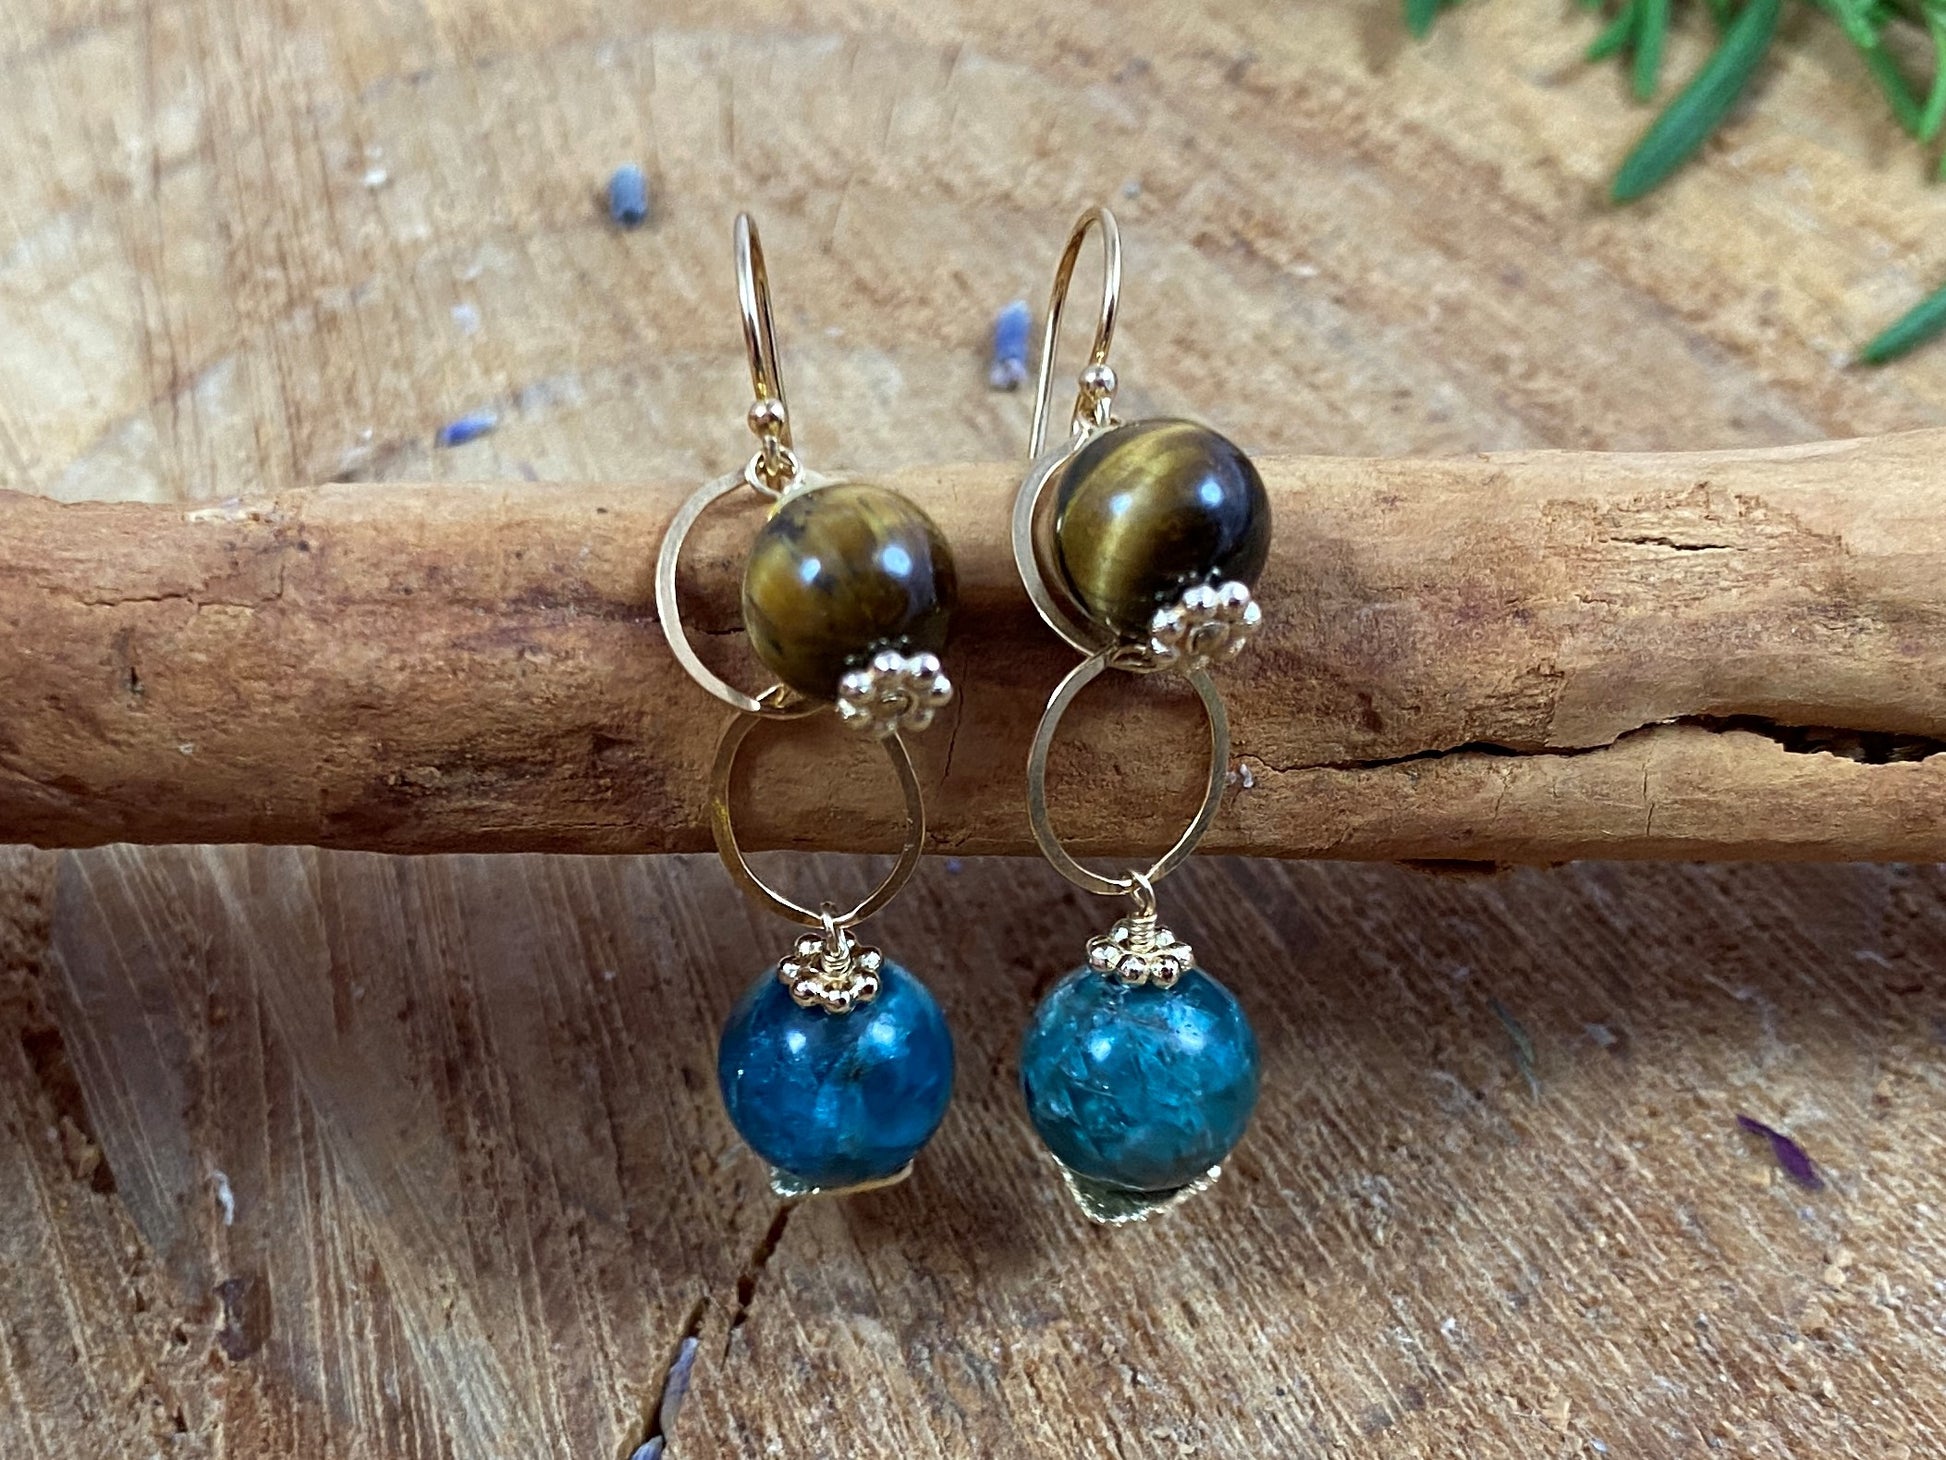 Hook Earrings with Apatite and Tiger's eye